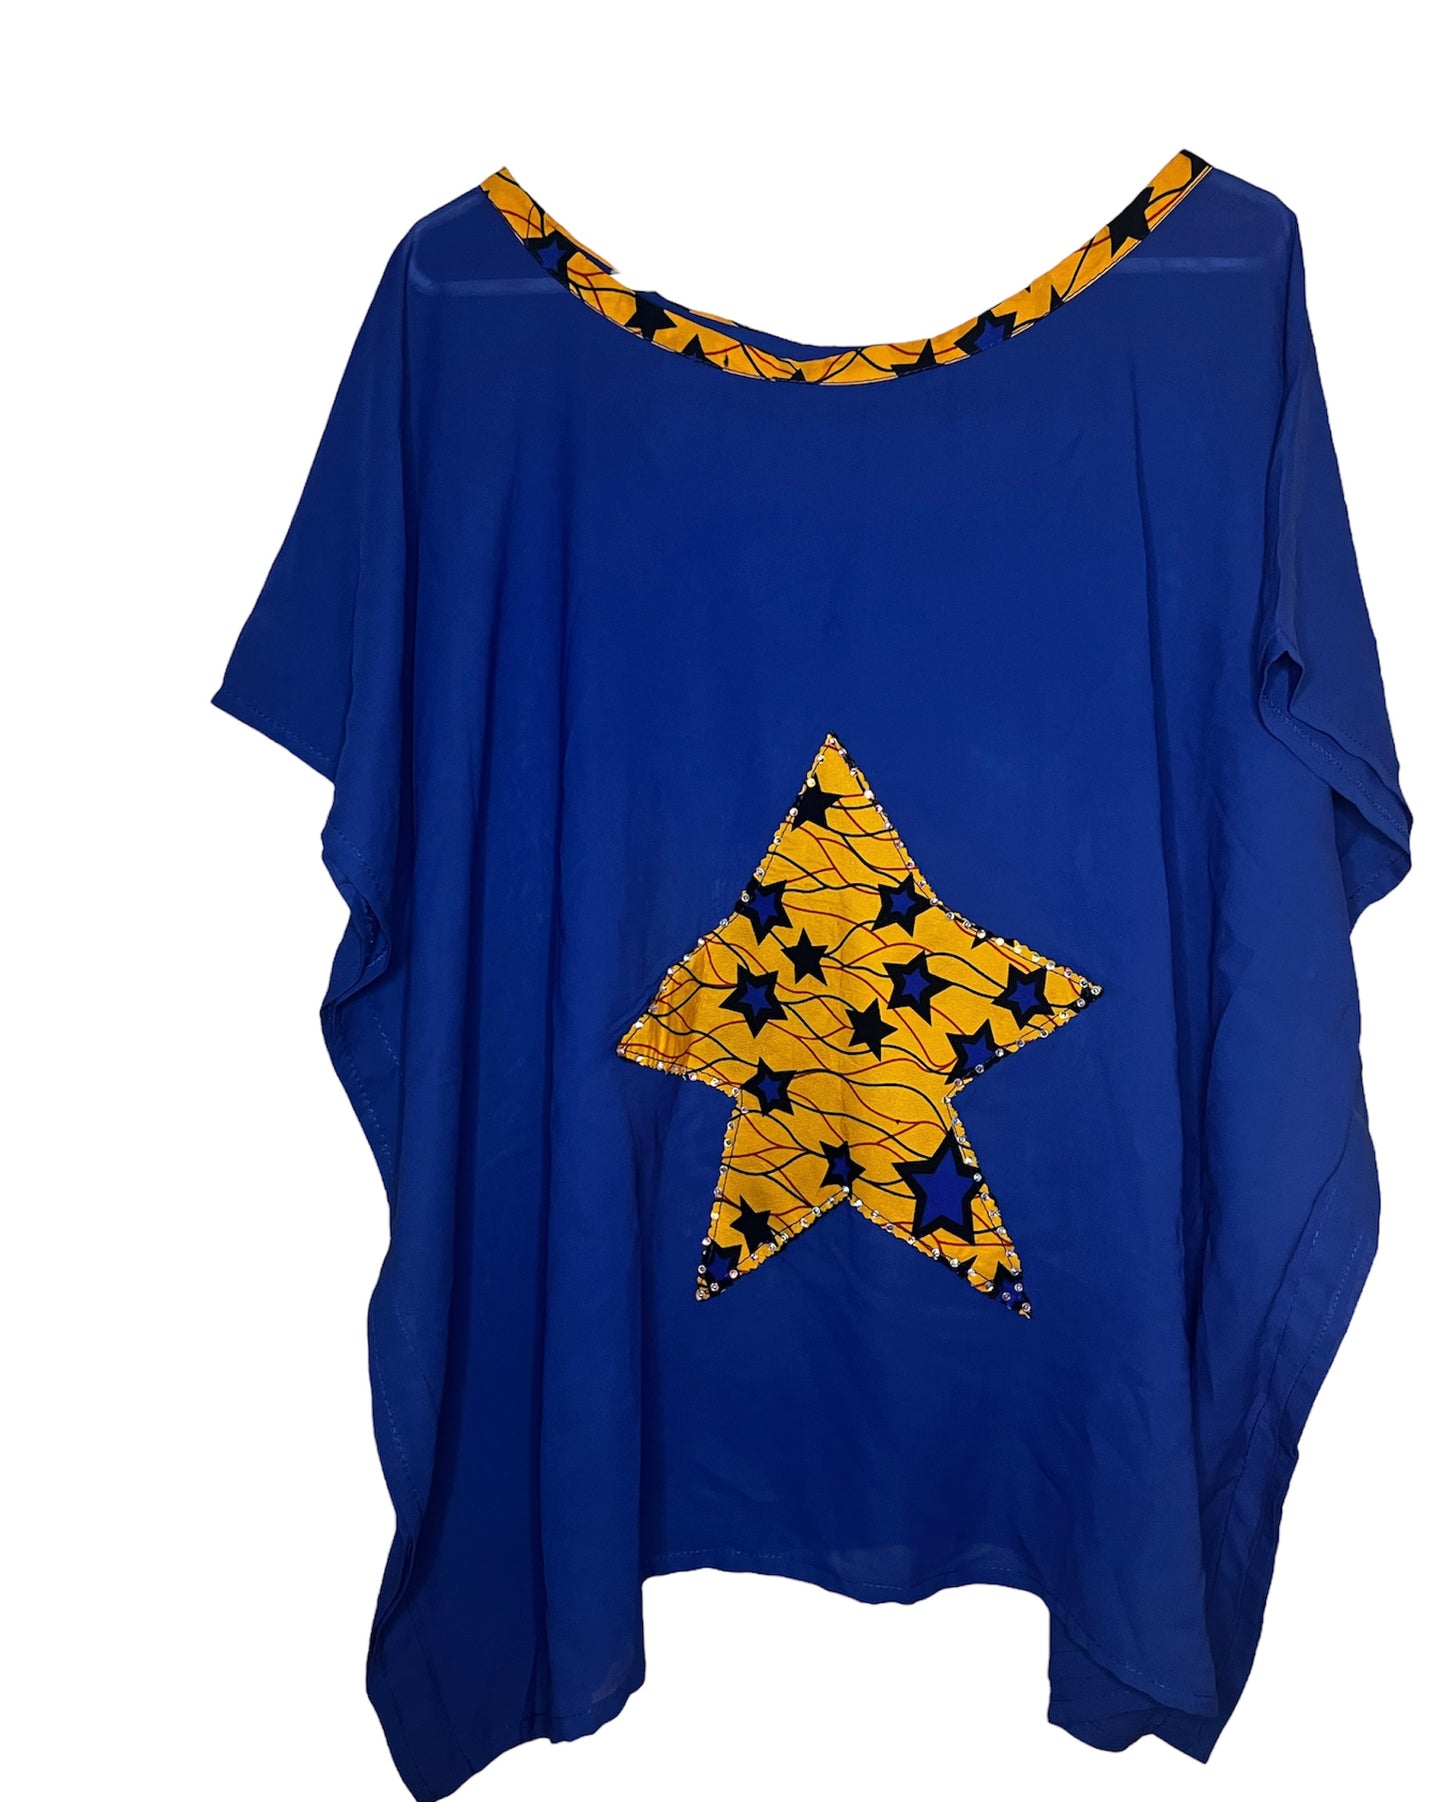 Blue Shortsleeve Boubou Top with Star-Cut African Print